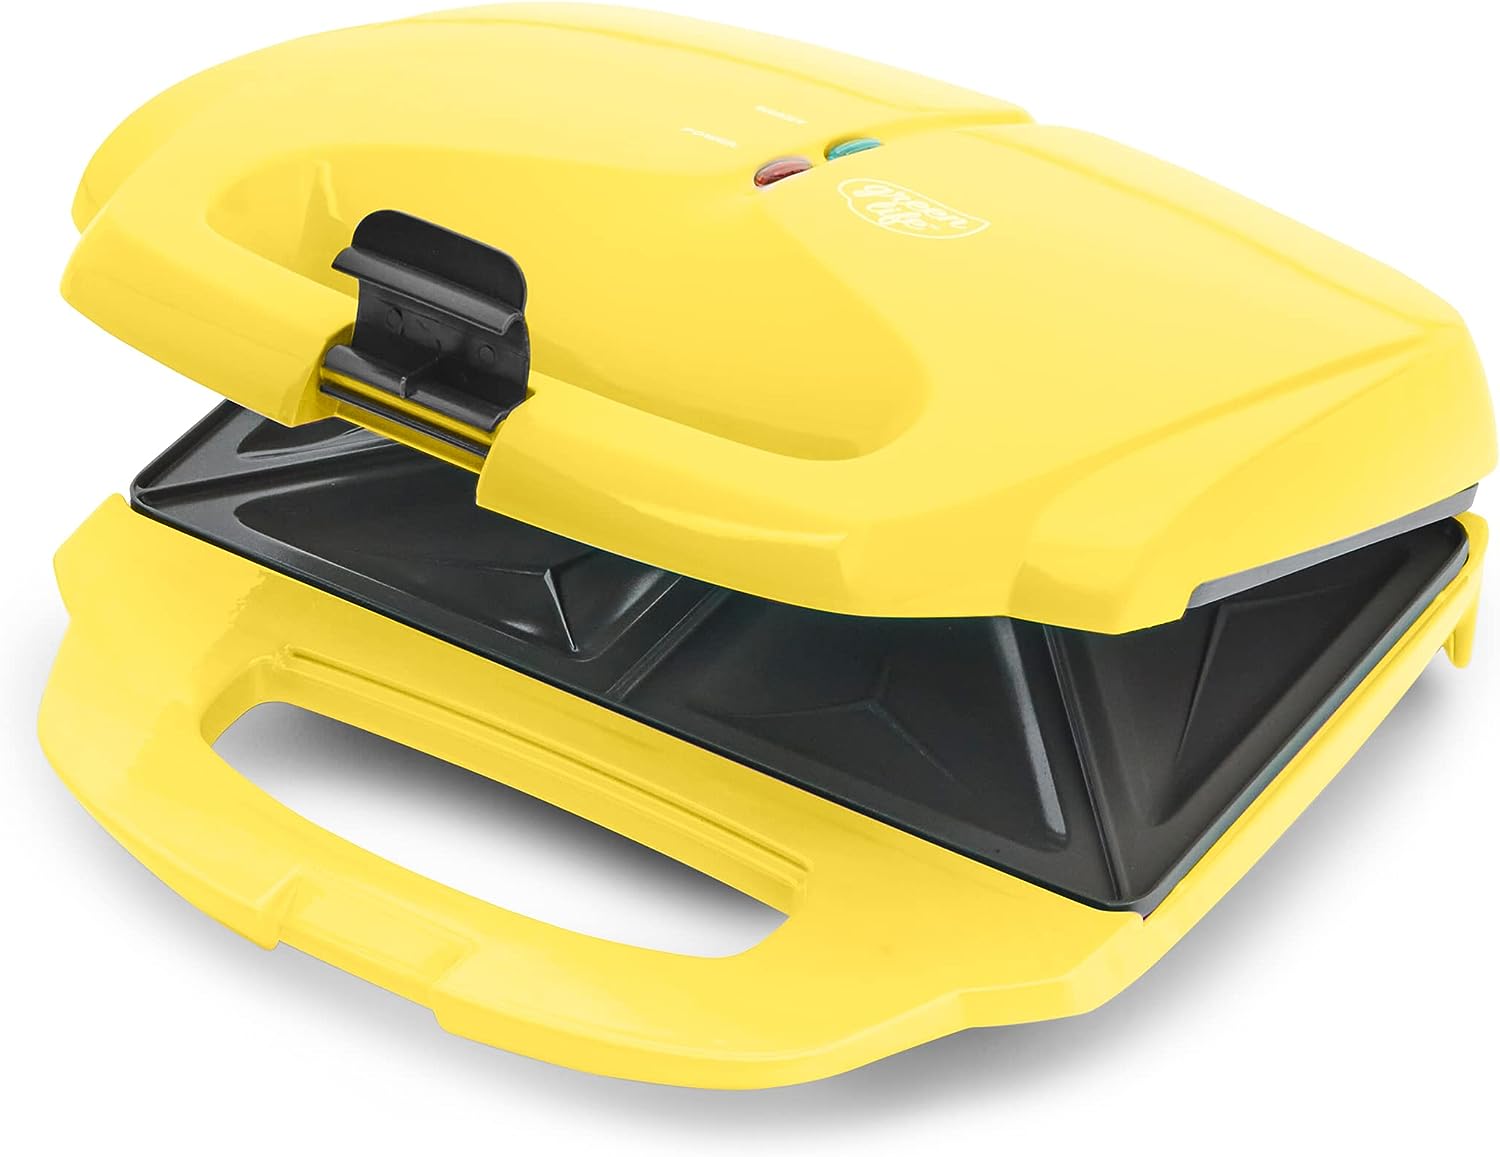 GreenLife Pro Electric Panini Press Grill and Sandwich Maker, Healthy Ceramic Nonstick Plates, Easy Indicator Light, PFAS-Free, Yellow